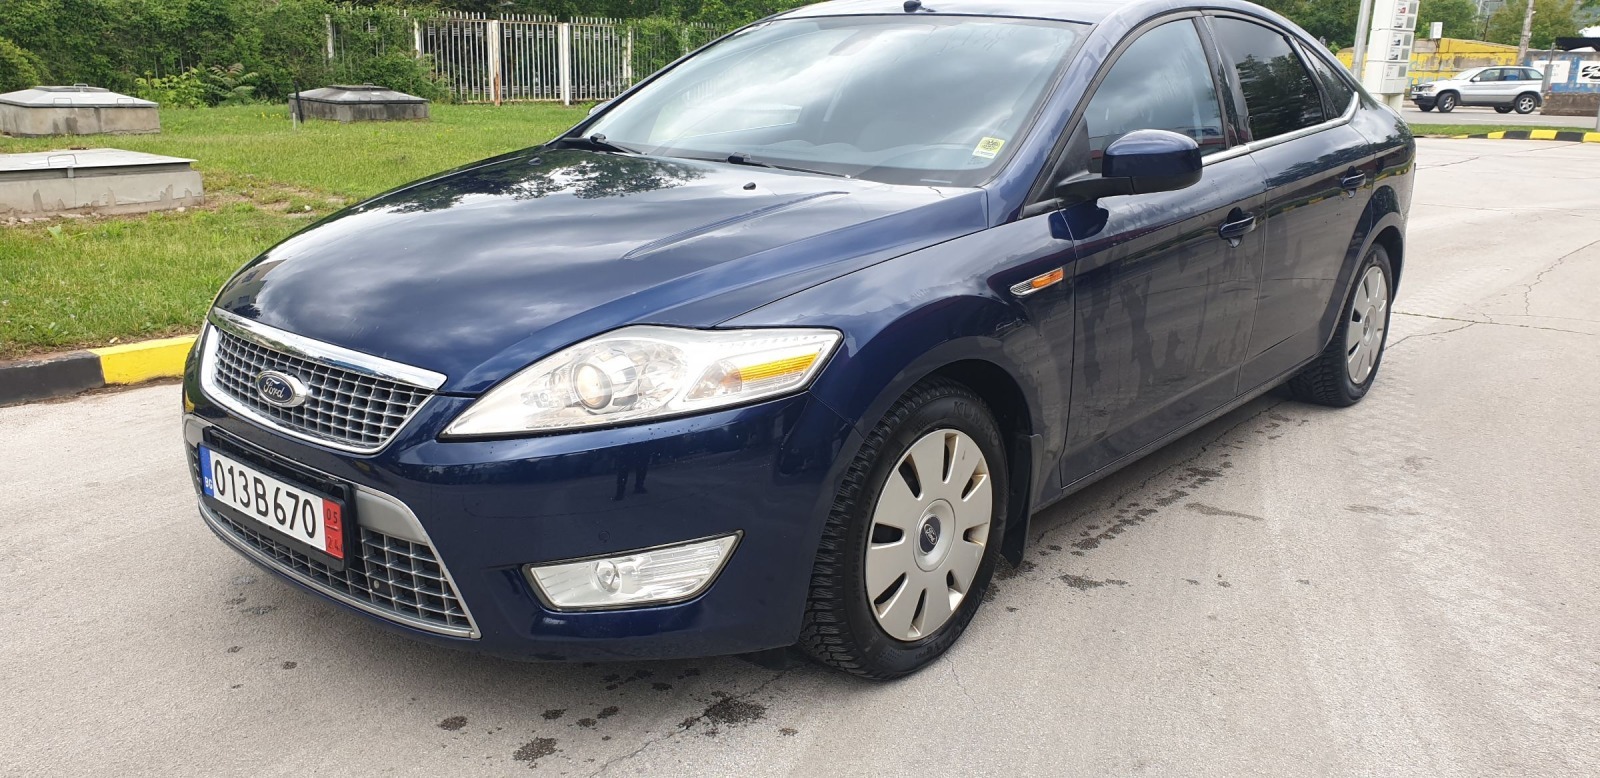 Ford Mondeo 2.0 CDTI  140кс. - [1] 